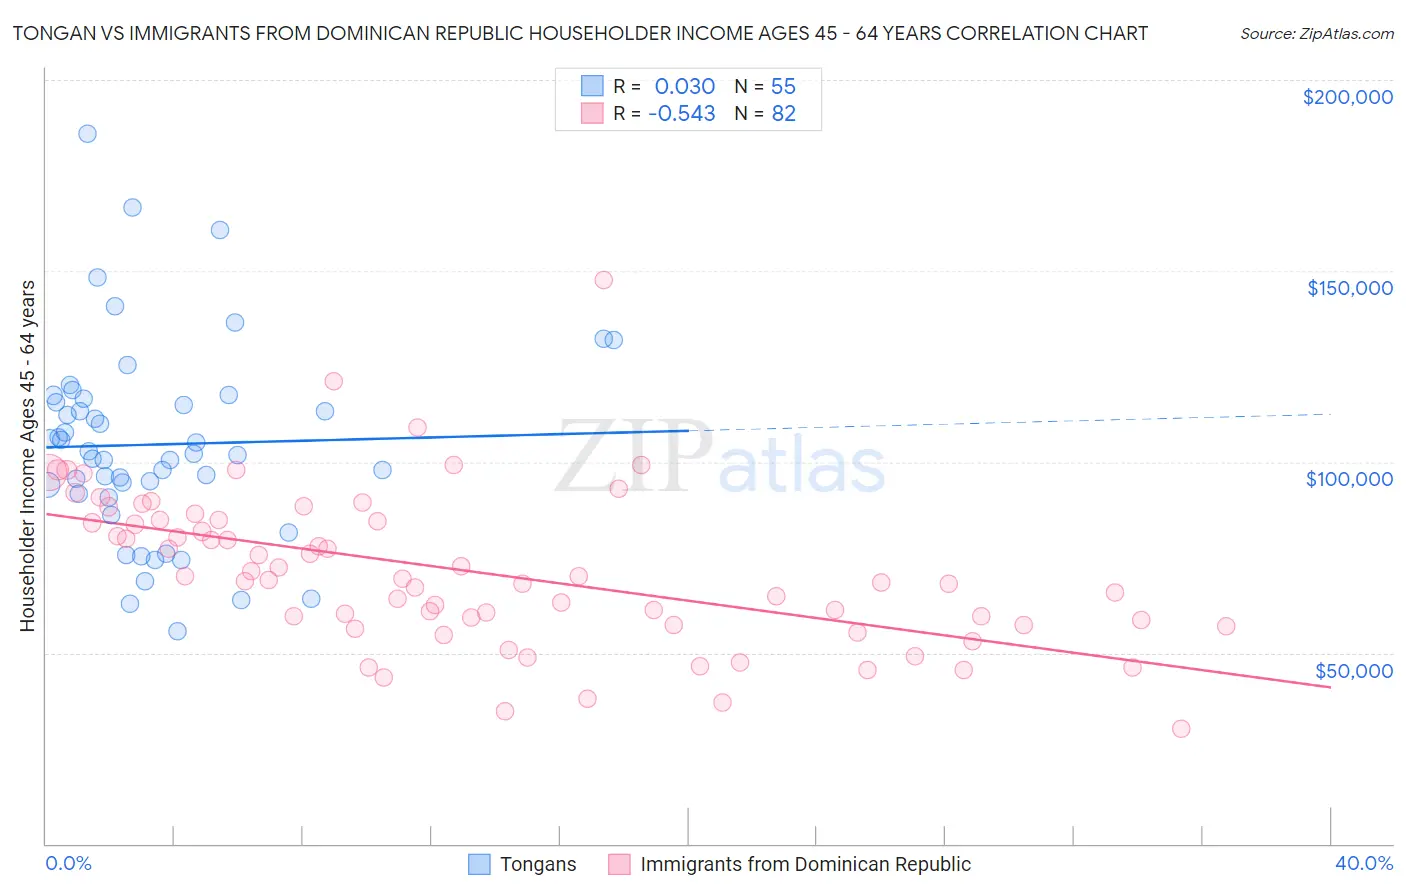 Tongan vs Immigrants from Dominican Republic Householder Income Ages 45 - 64 years